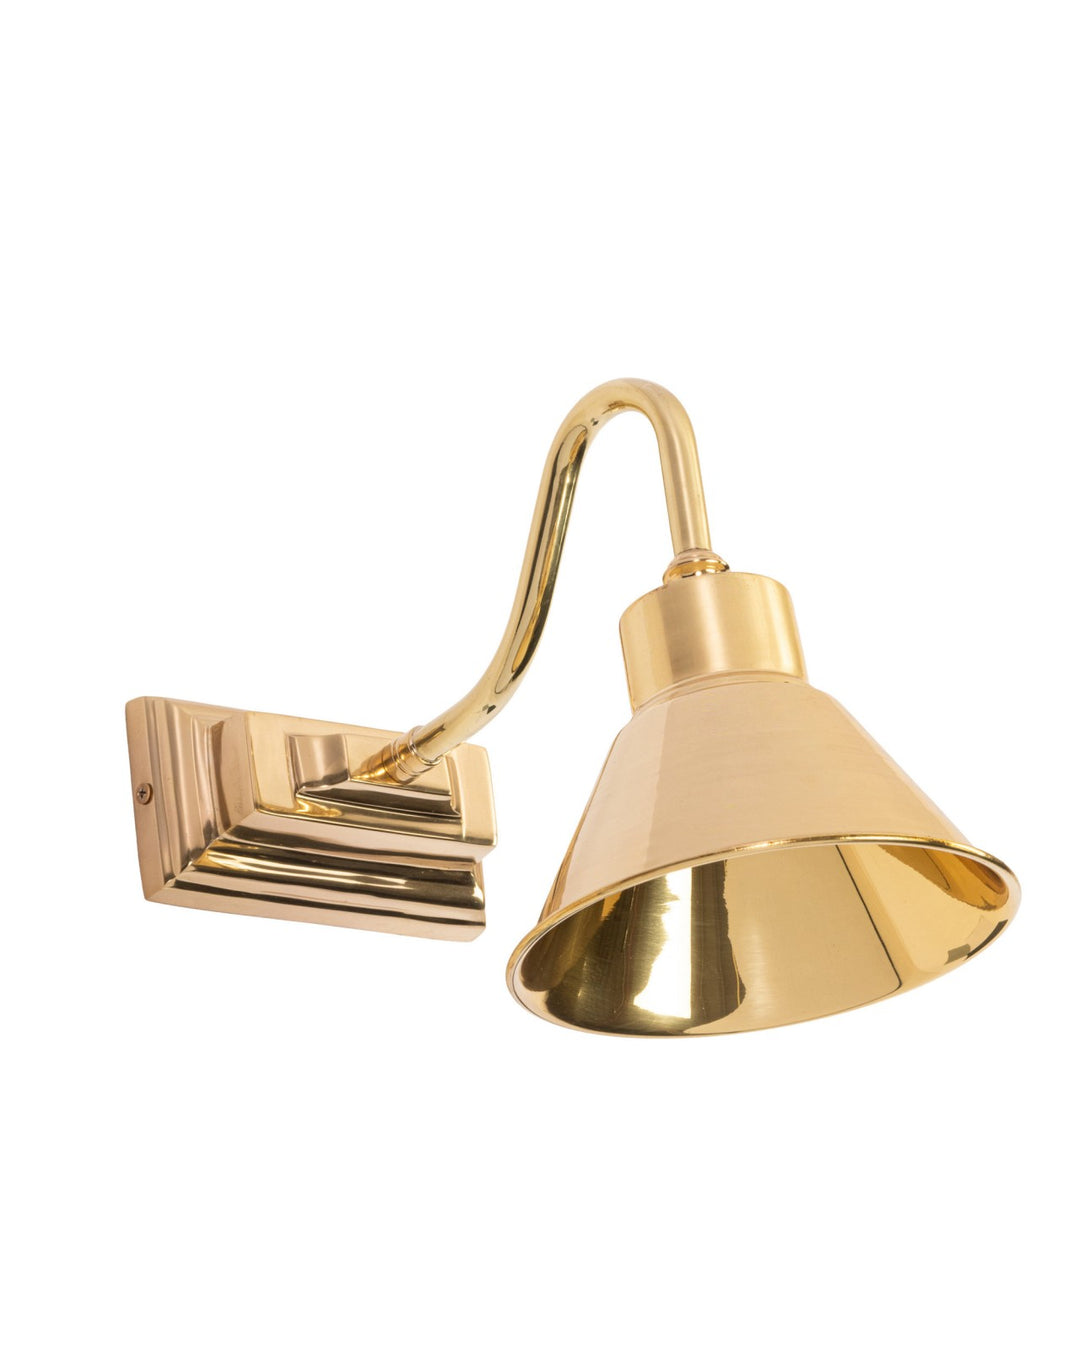 Newport Sconce in Polished Brass